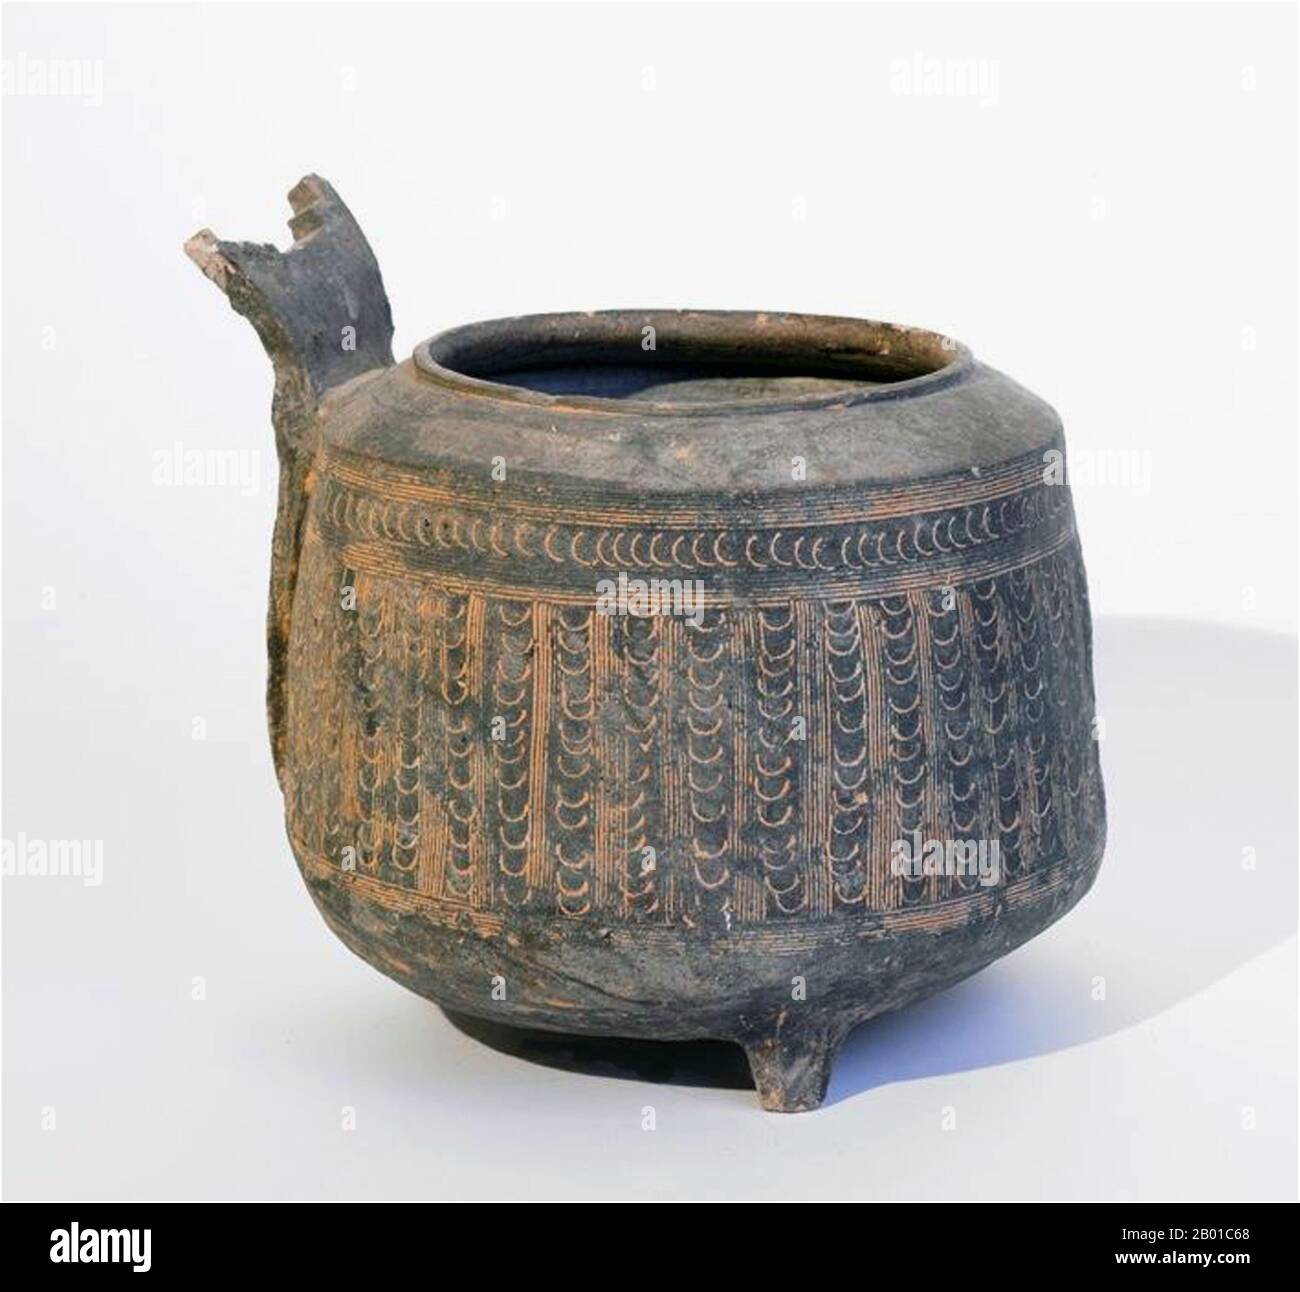 Vietnam: Tripod vessel with handle, incised pattern encrusted with red pigment, Dong Son Culture, c. 500-100 BCE.  Đông Sơn was a prehistoric Bronze Age culture in Vietnam centered on the Red River Valley of northern Vietnam. At this time the first Vietnamese kingdoms of Văn Lang and Âu Lạc appeared. Its influence flourished in other neighbouring parts of Southeast Asia from about 500 BCE to 100 CE. Stock Photo